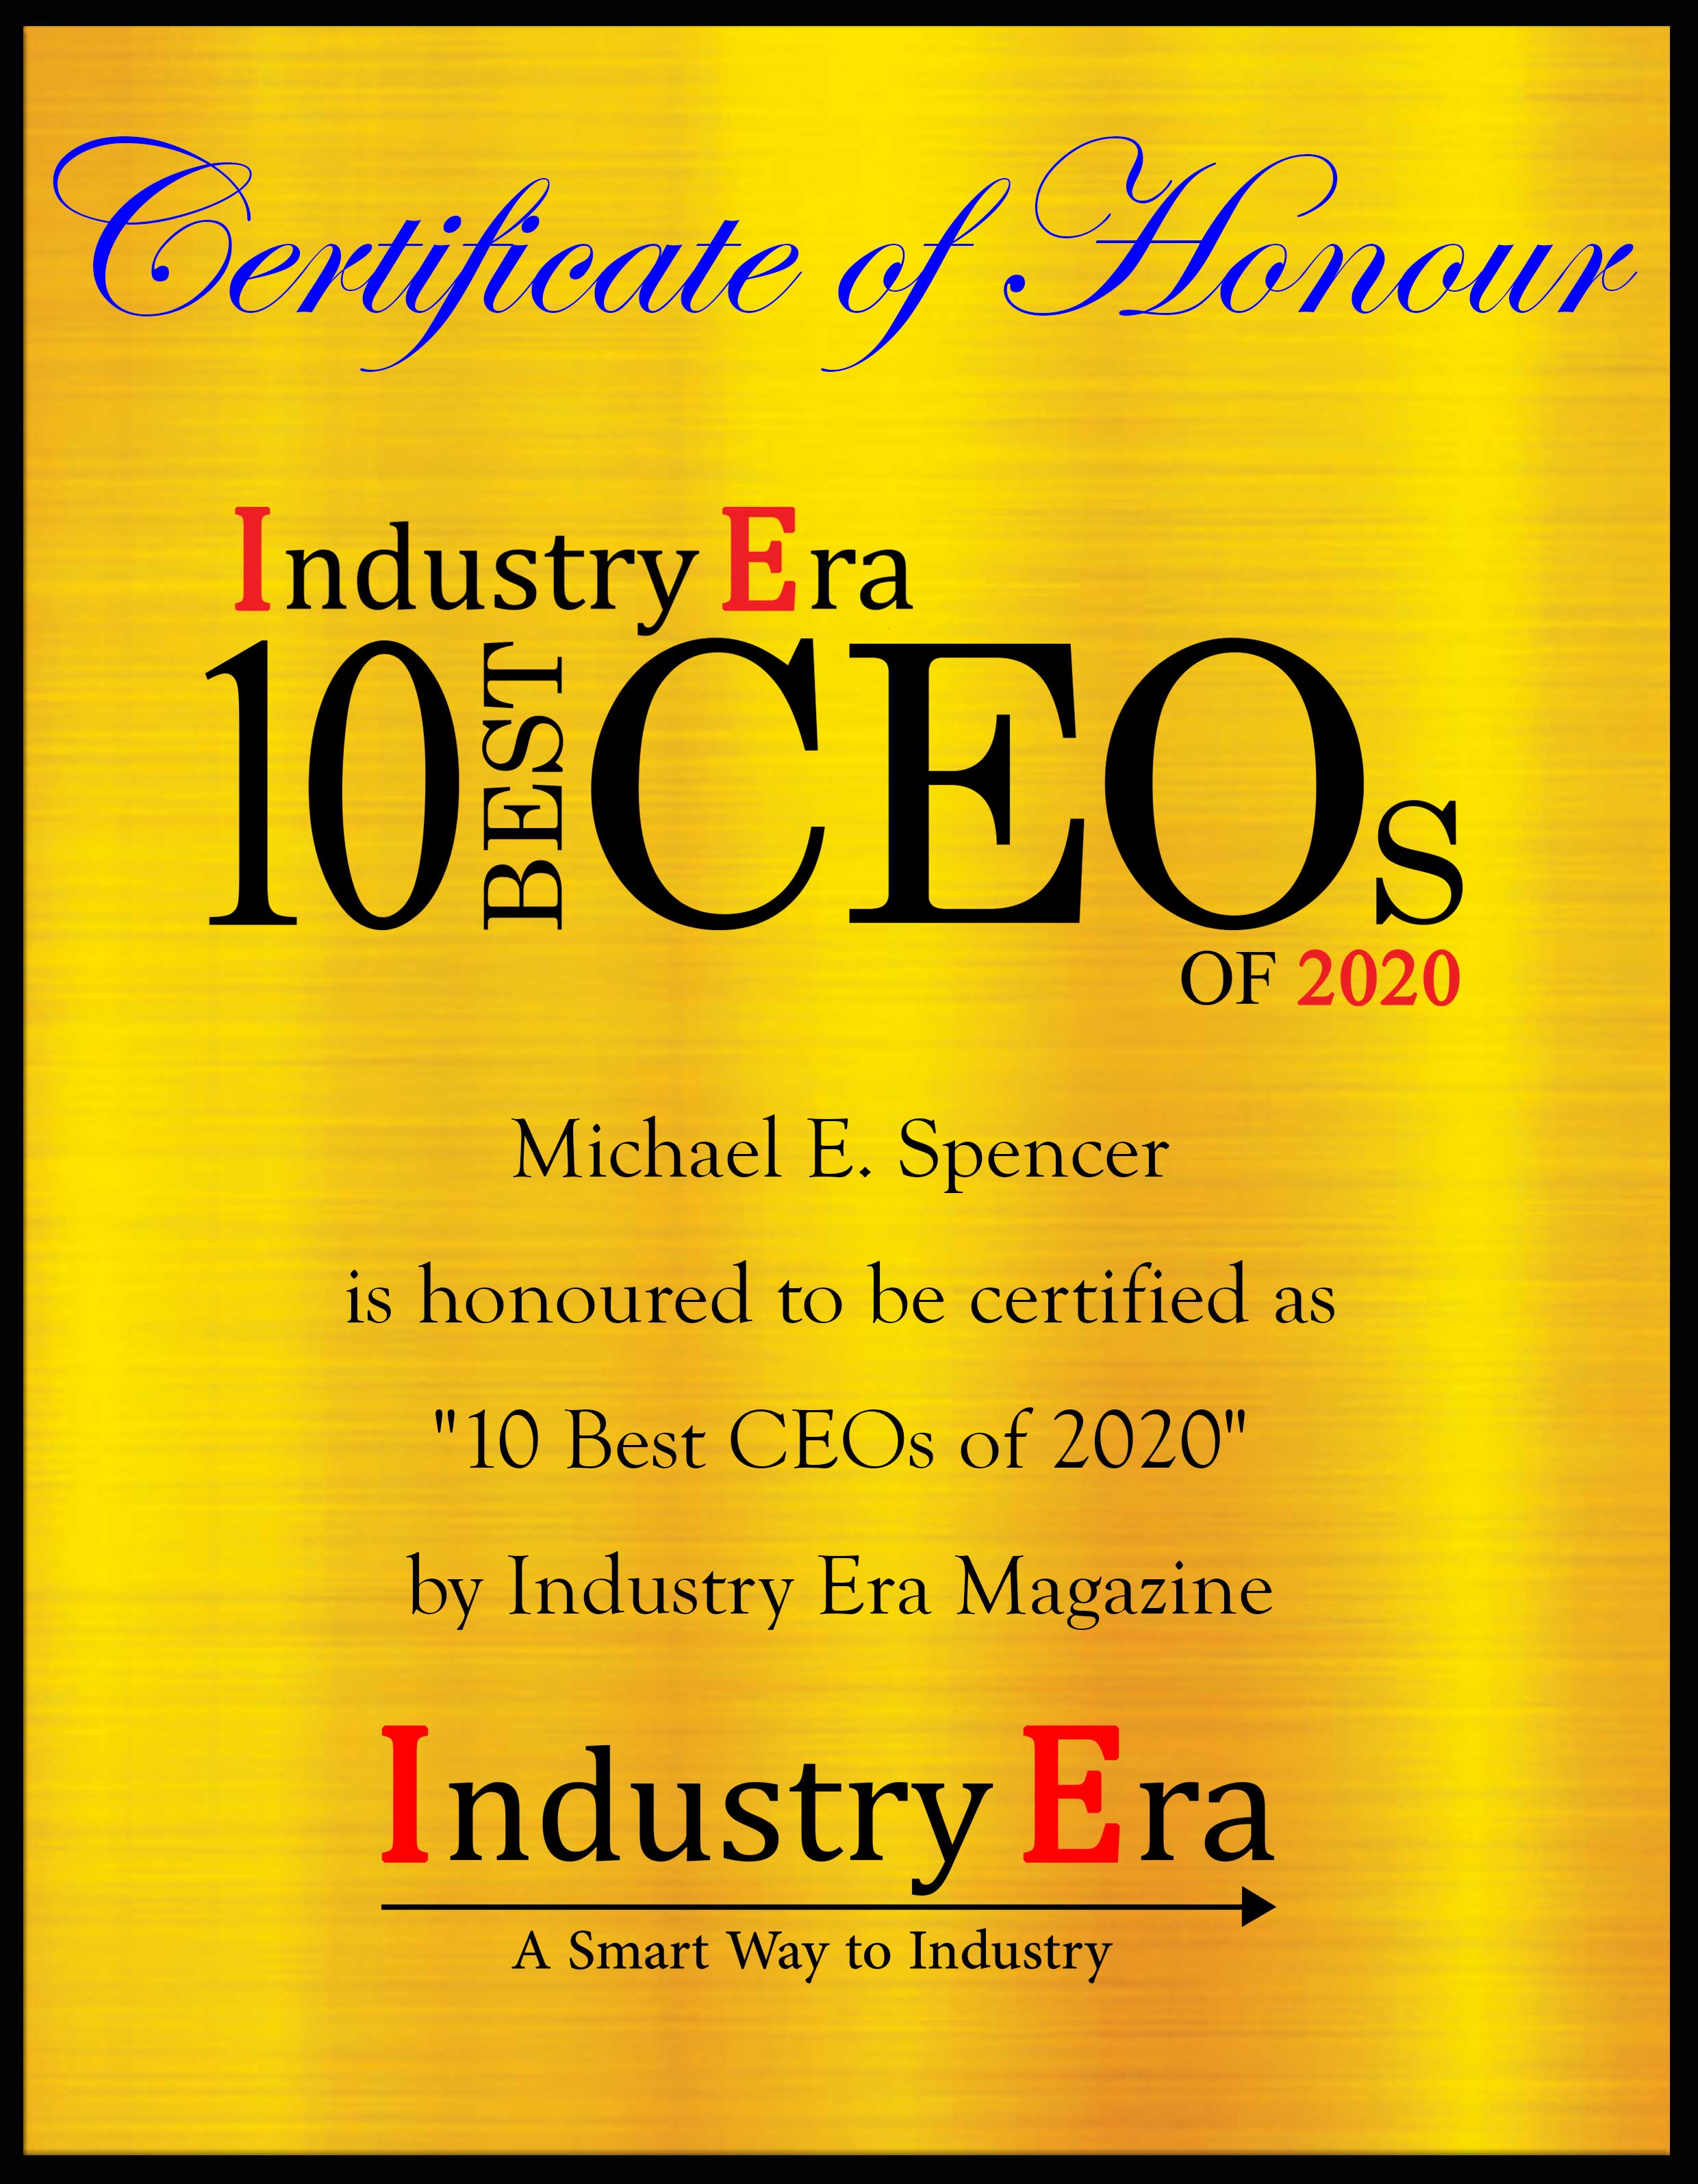 Michael E. Spencer, Founder Global Expansion Strategies Certificate